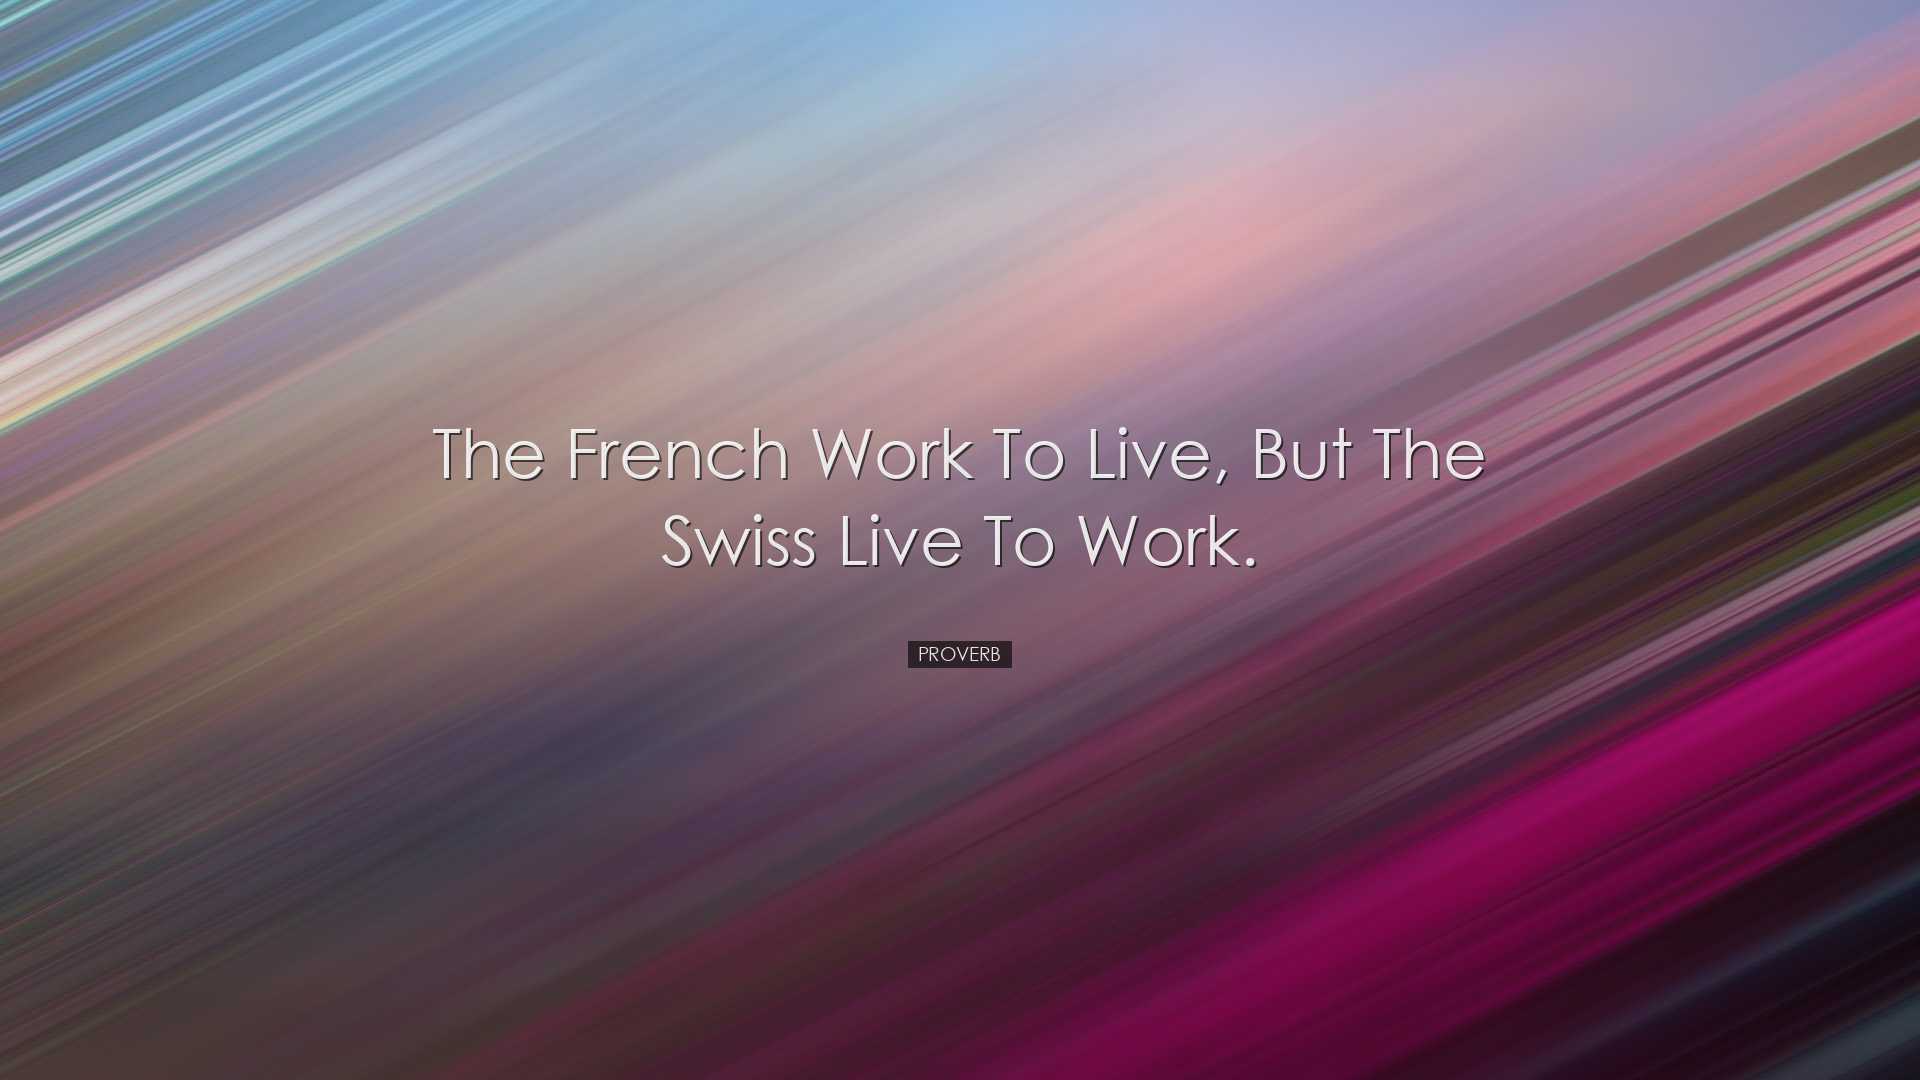 The French work to live, but the Swiss live to work. - Proverb